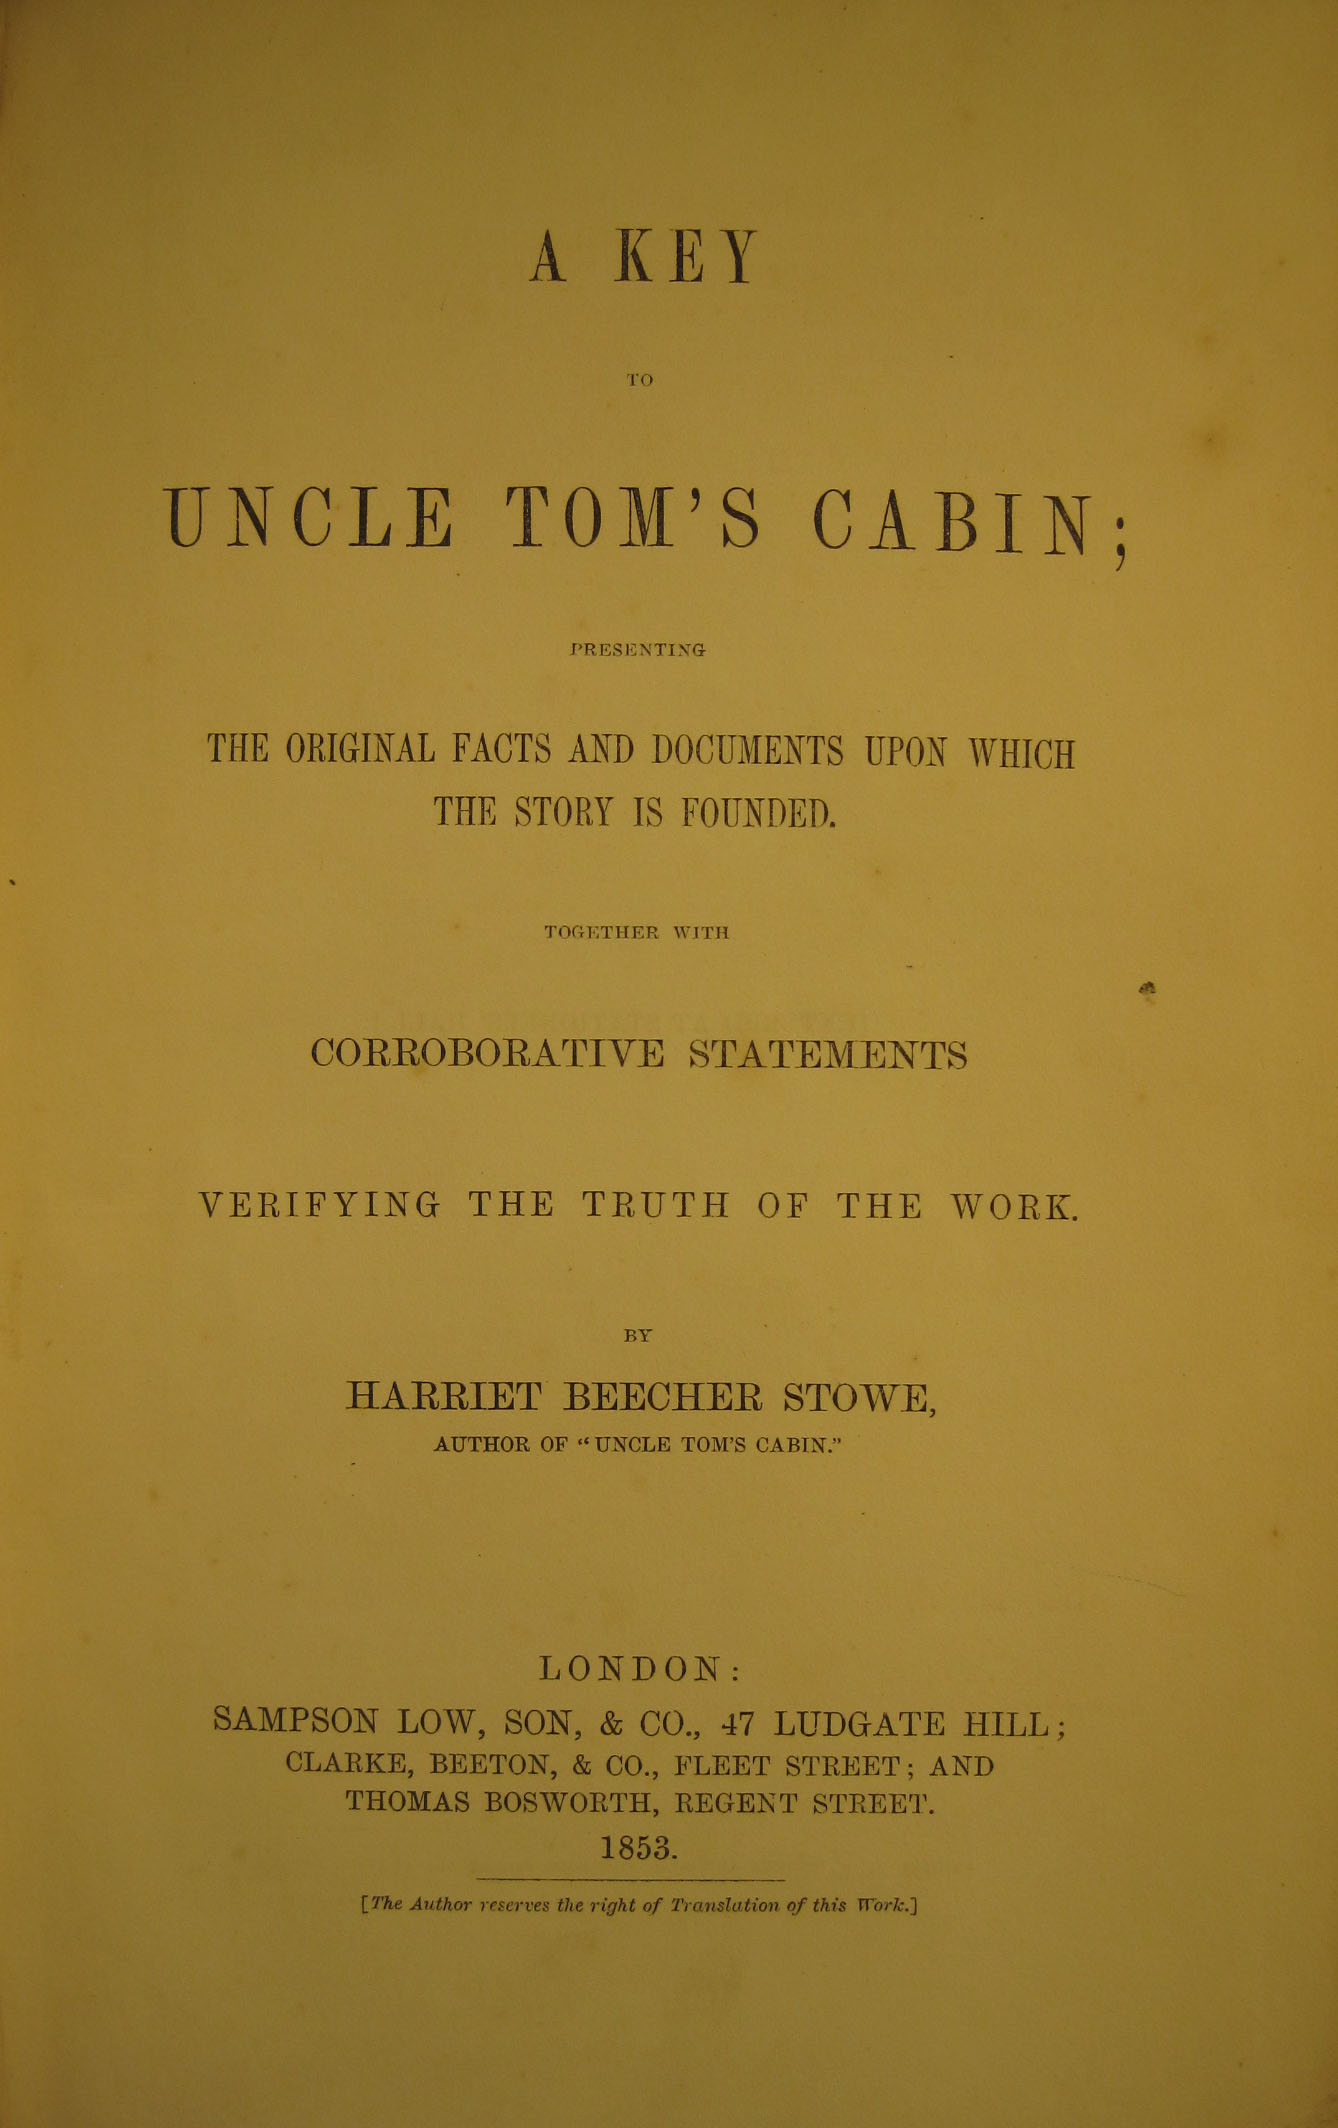 A Key to Uncle Tom’s Cabin (1853)